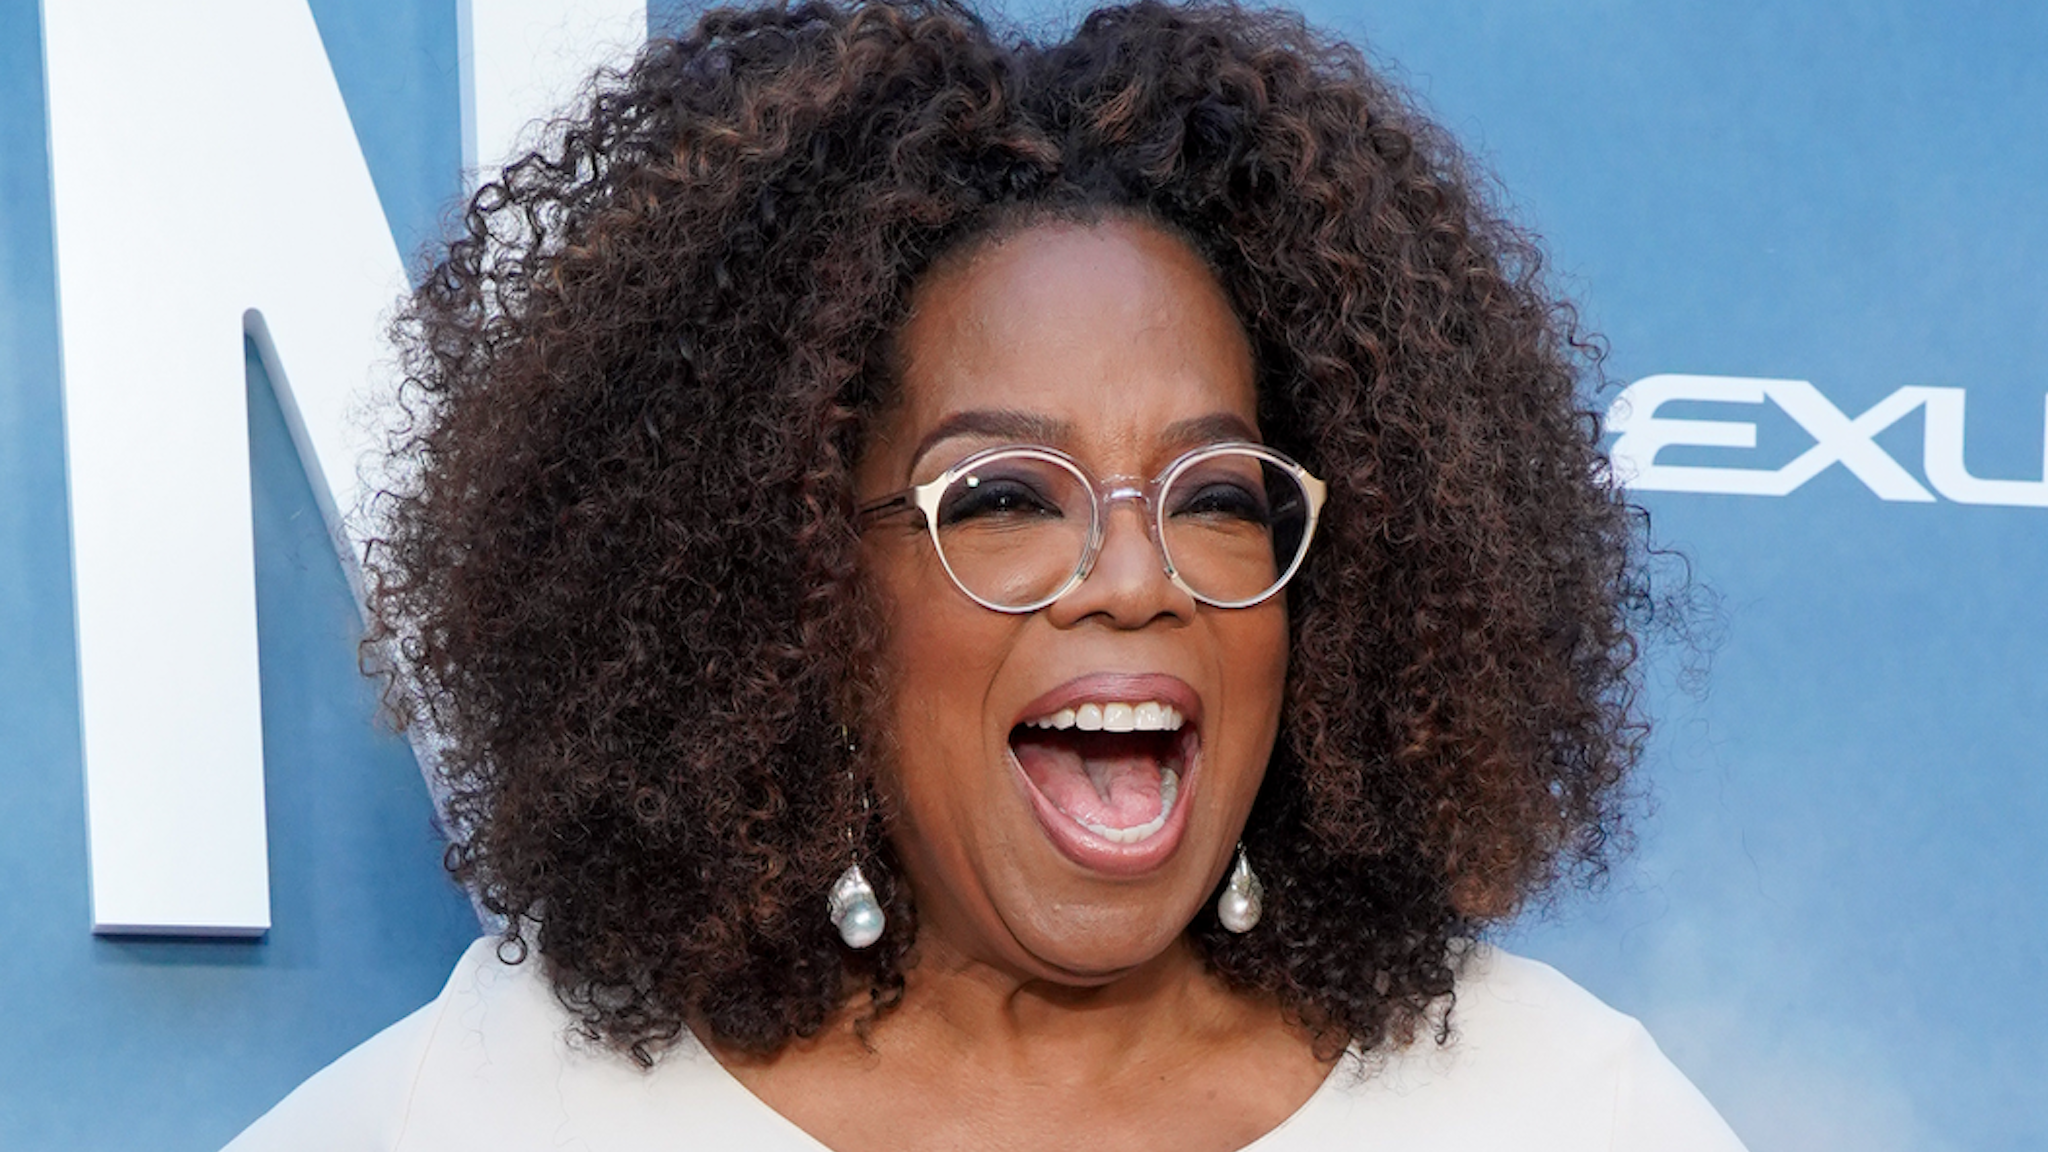 Oprah Winfrey attends the premiere of OWN's "David Makes Man" at NeueHouse Hollywood on August 06, 2019 in Los Angeles, California.